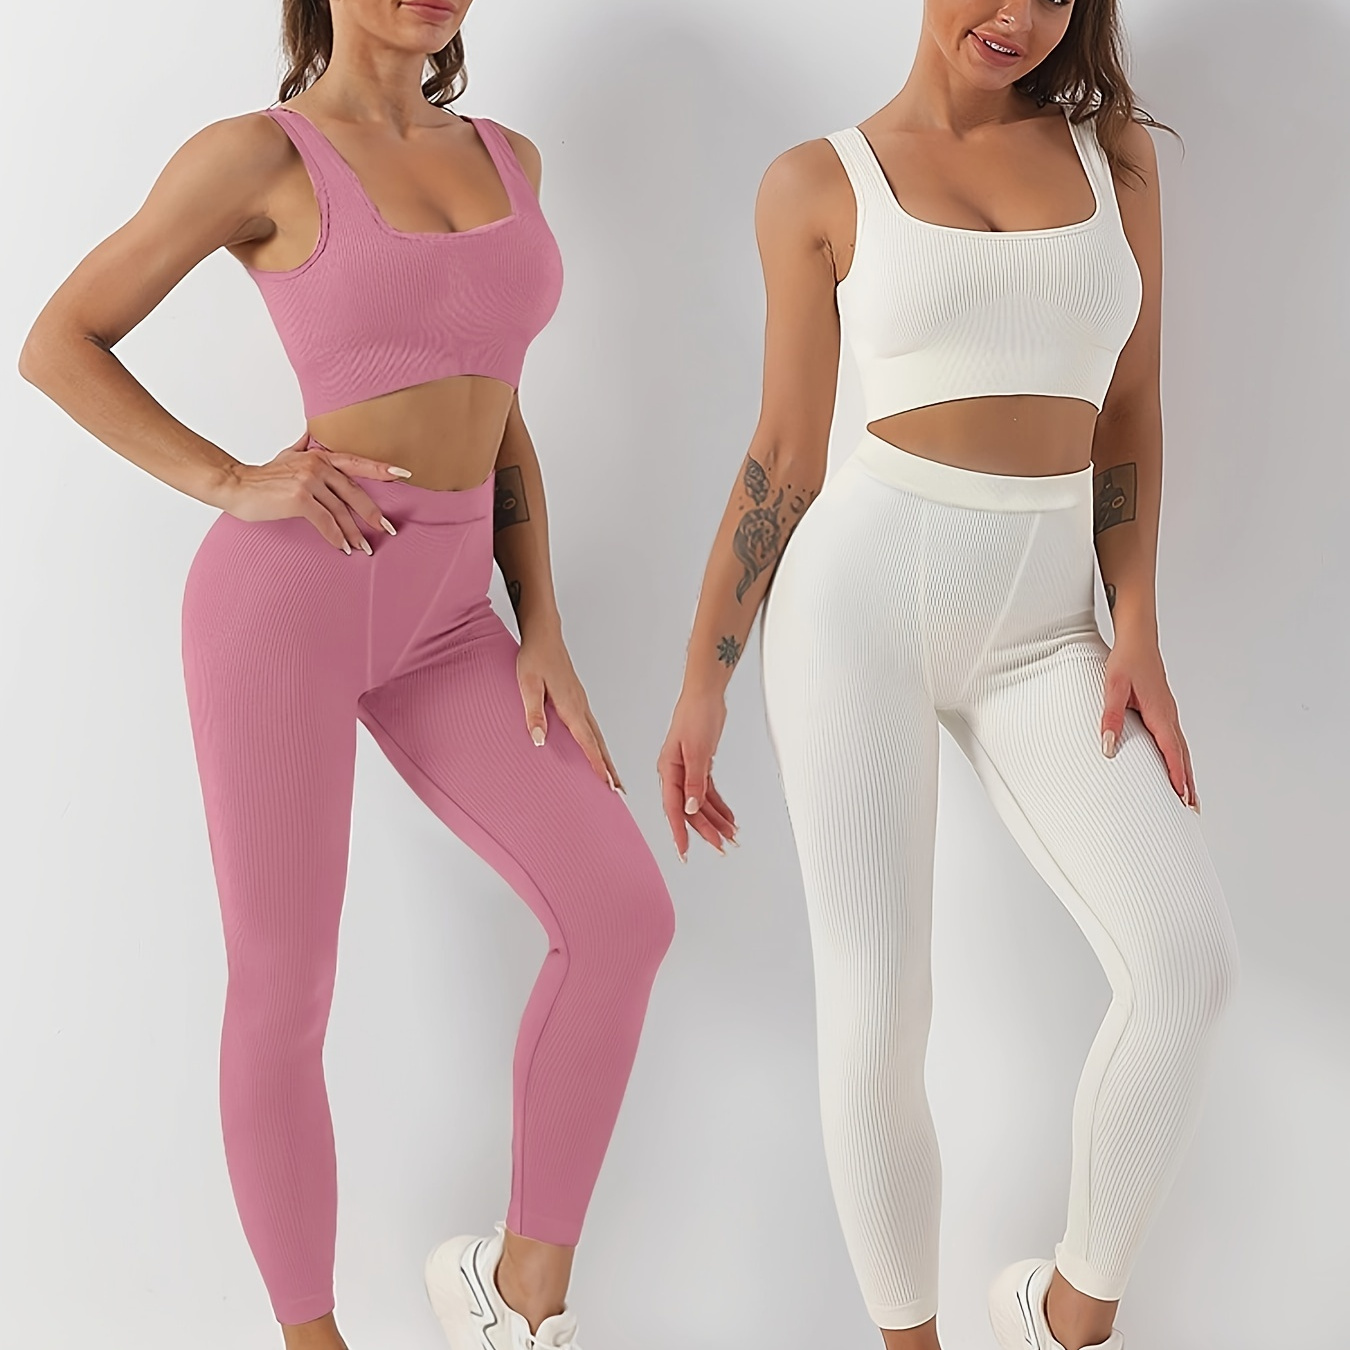 Hero Tights And Vest Sets - Yoga